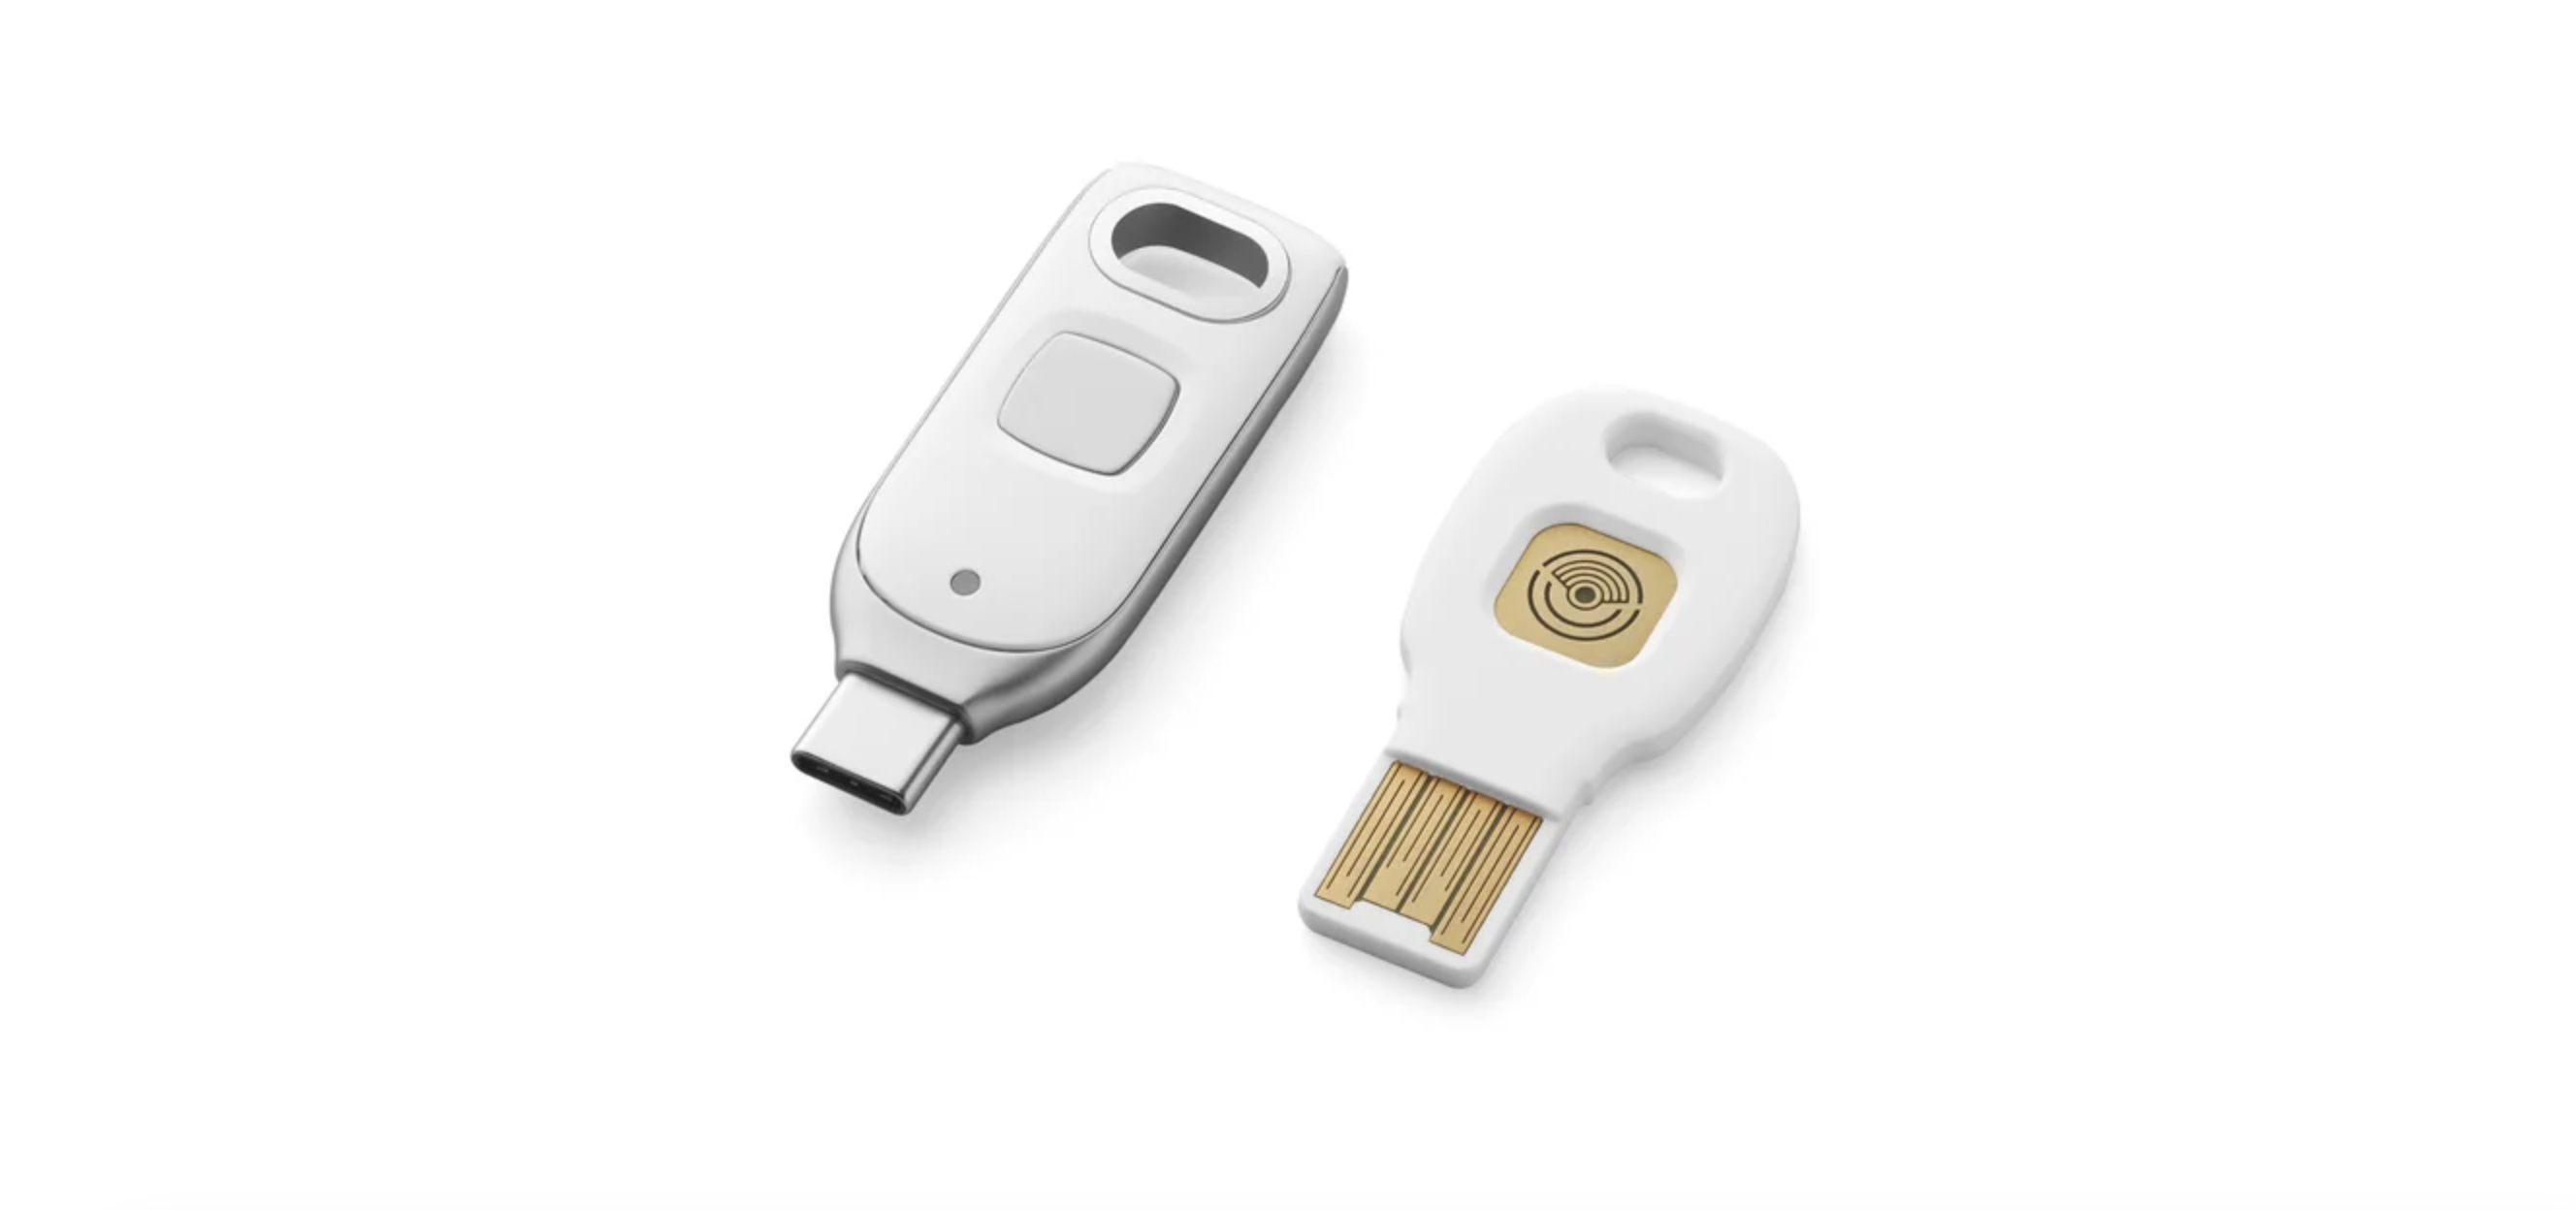 google-adds-passkey-support-to-new-titan-security-key 